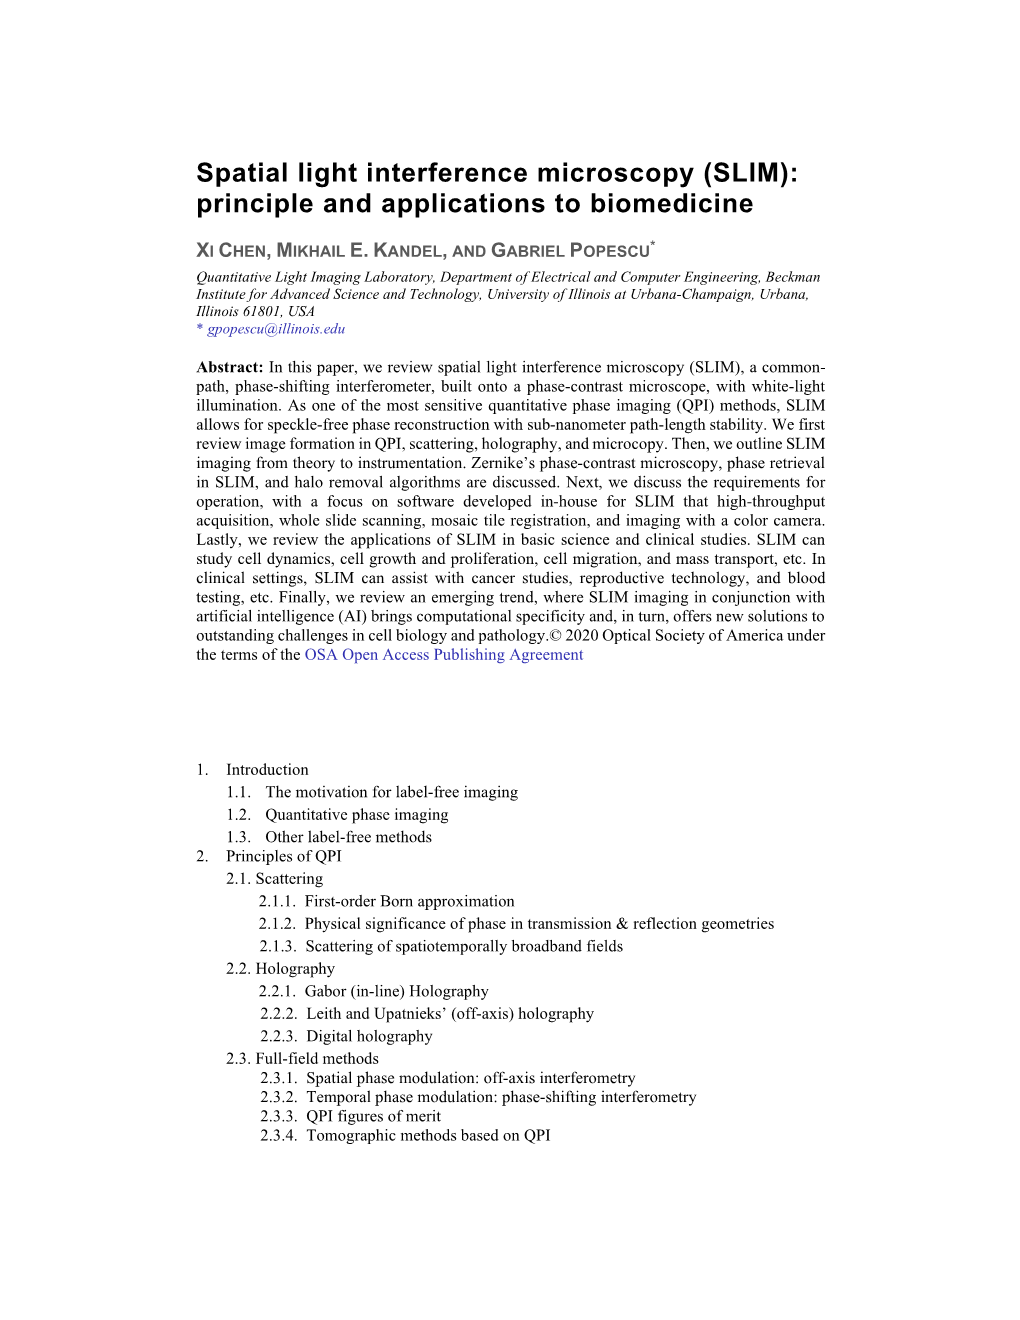 Spatial Light Interference Microscopy (SLIM): Principle and Applications to Biomedicine